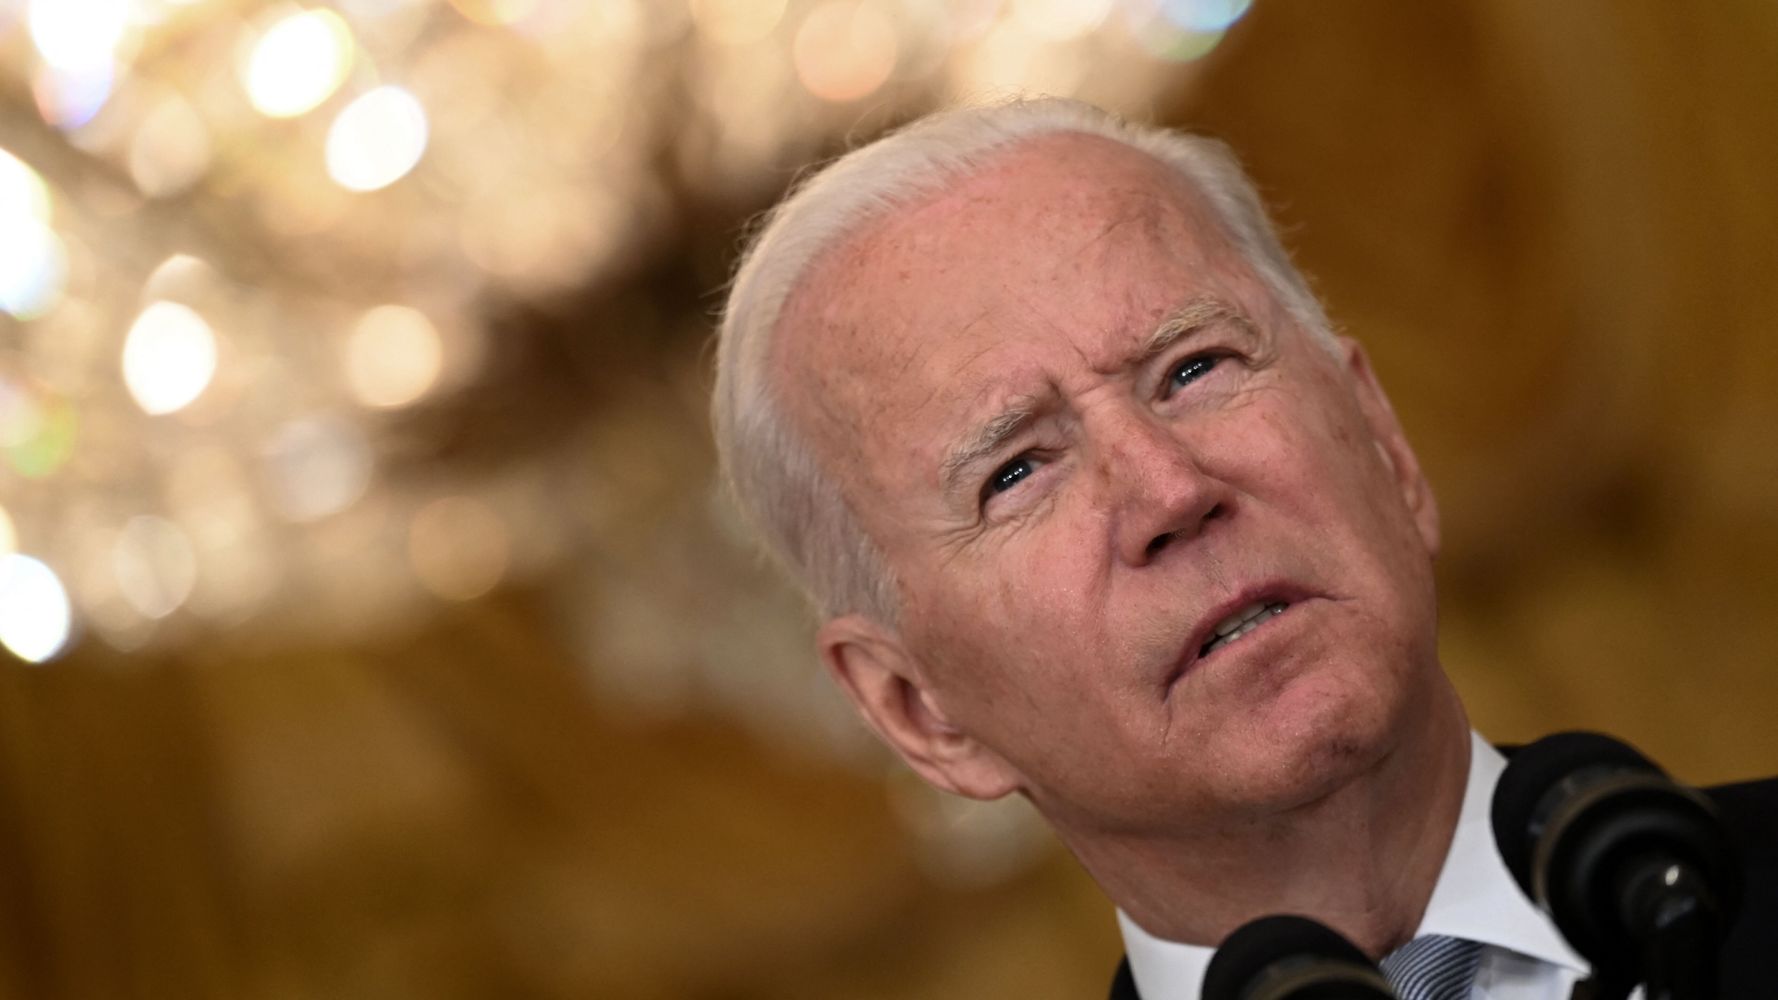 Biden Cancels Trip To Delaware, Monitors Afghanistan From D.C.